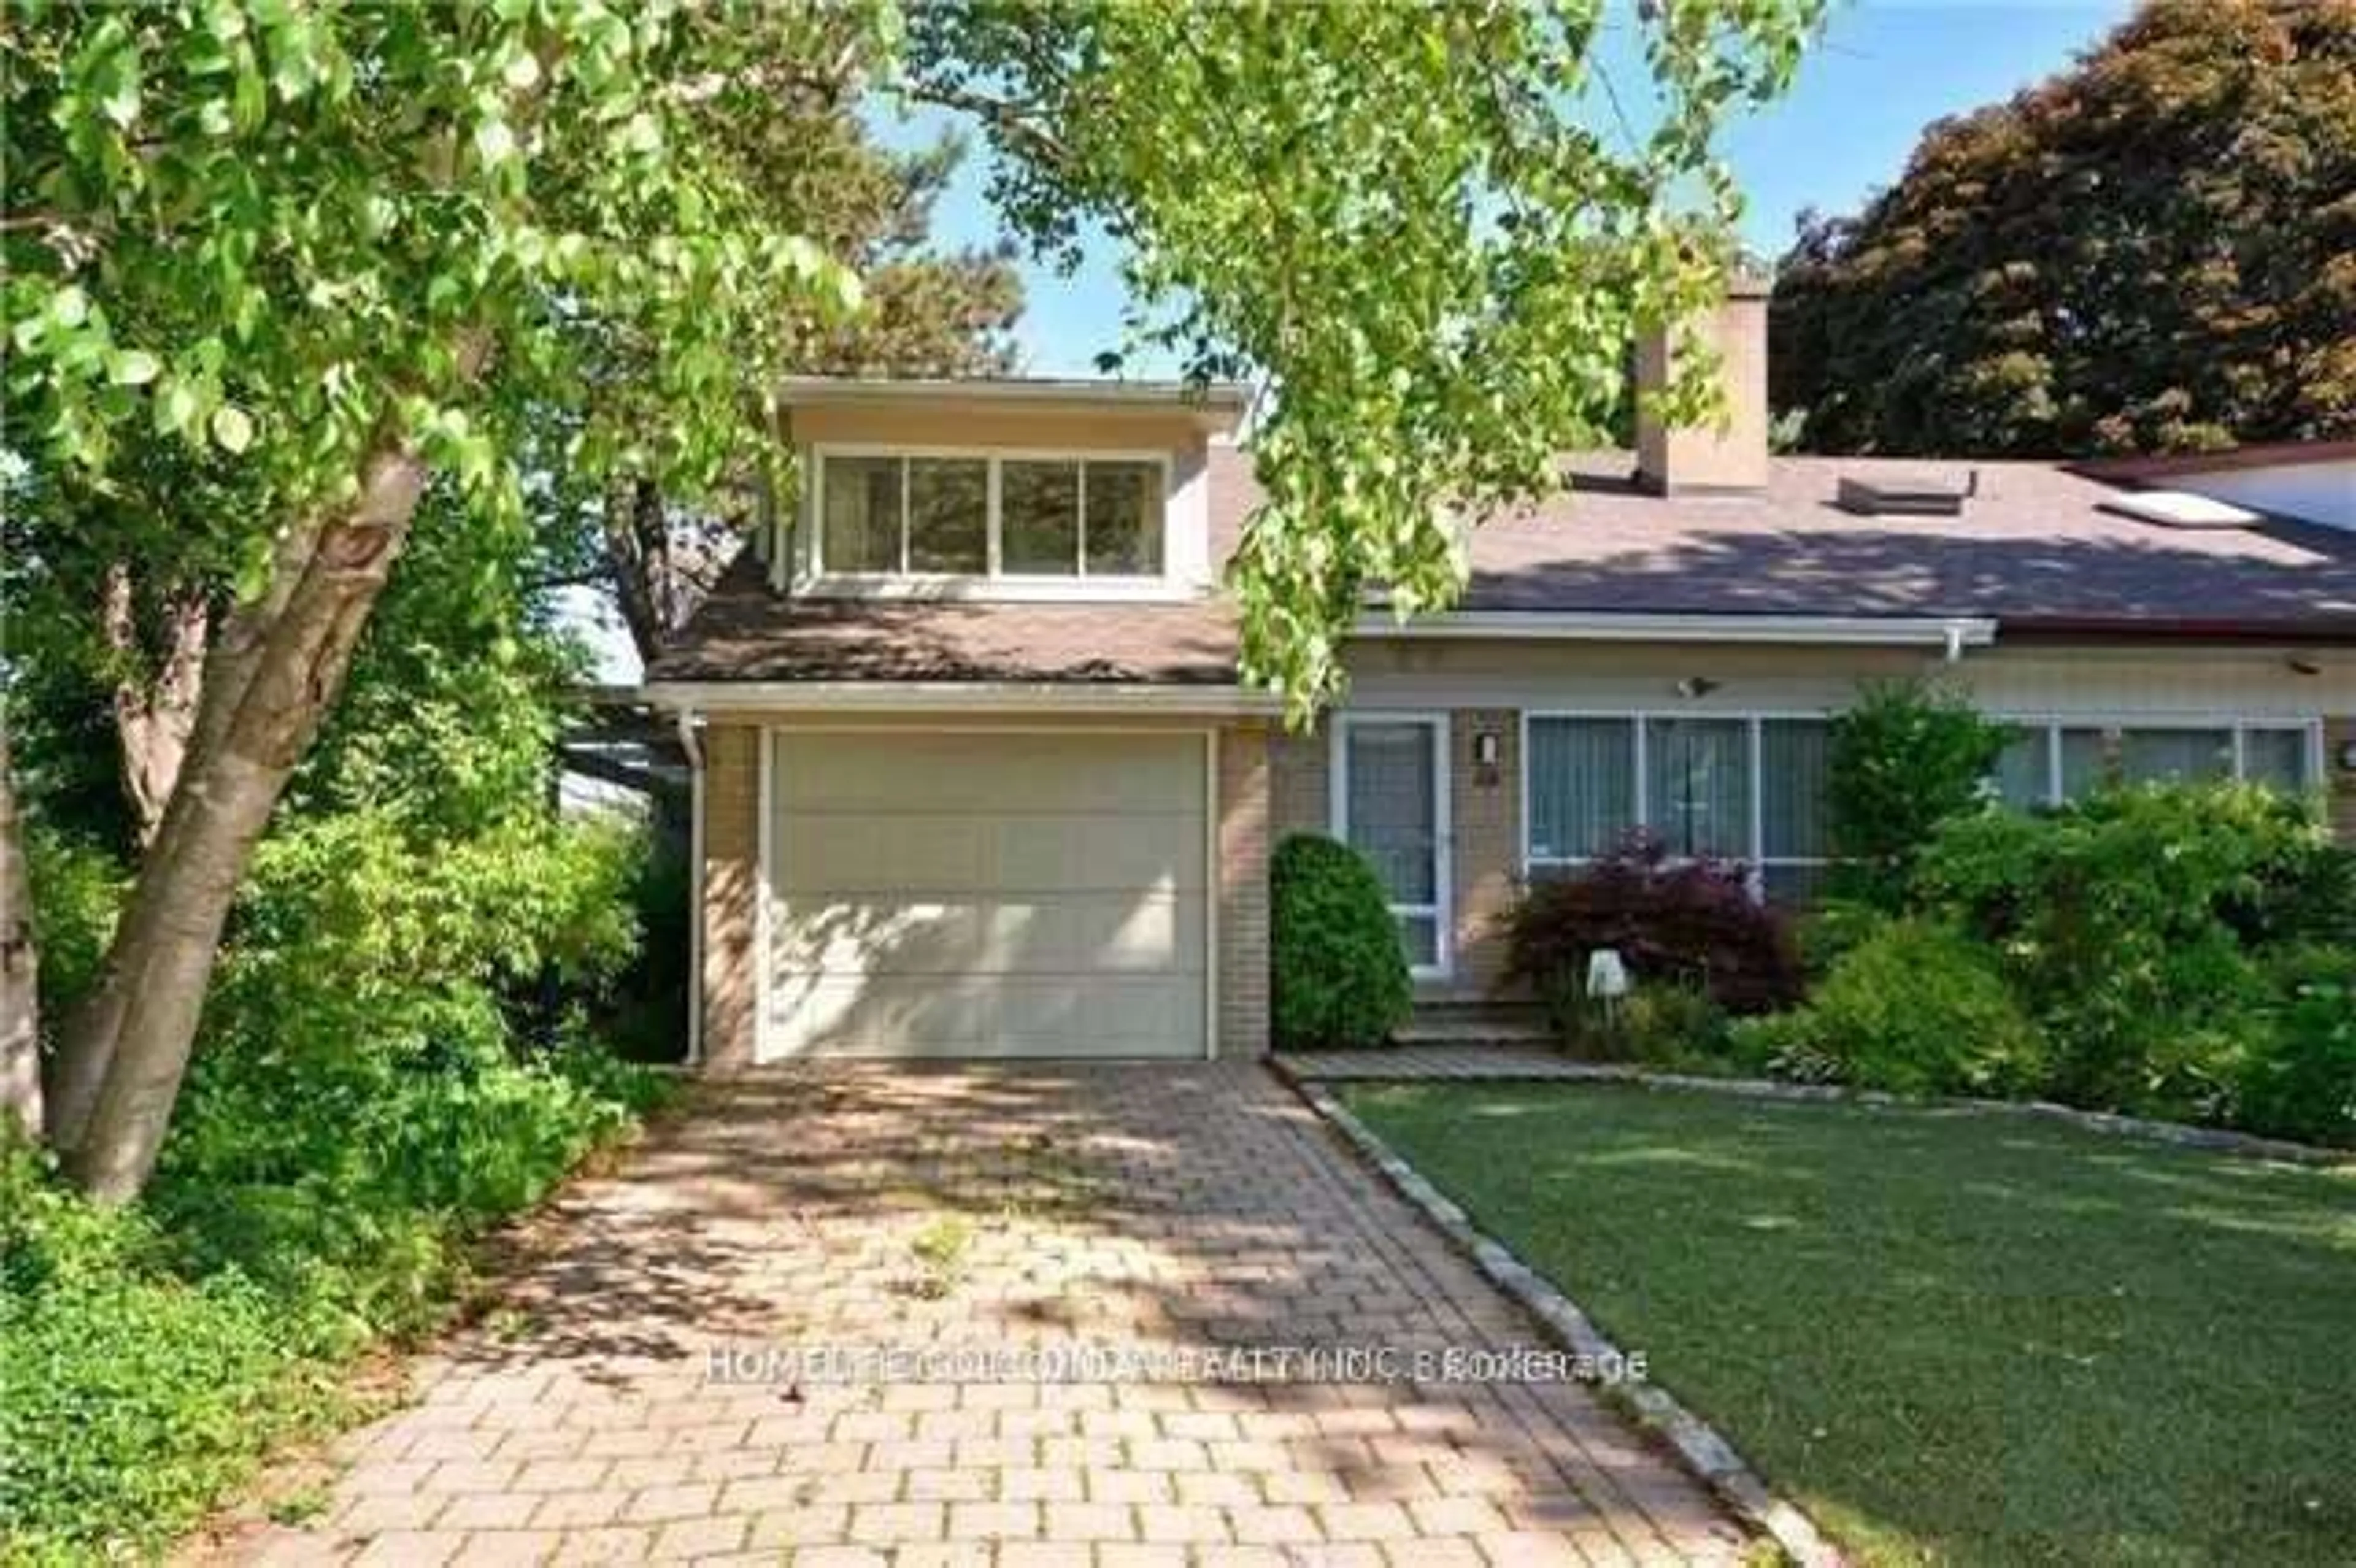 Home with brick exterior material for 168 Three Valleys Dr, Toronto Ontario M3A 3B9